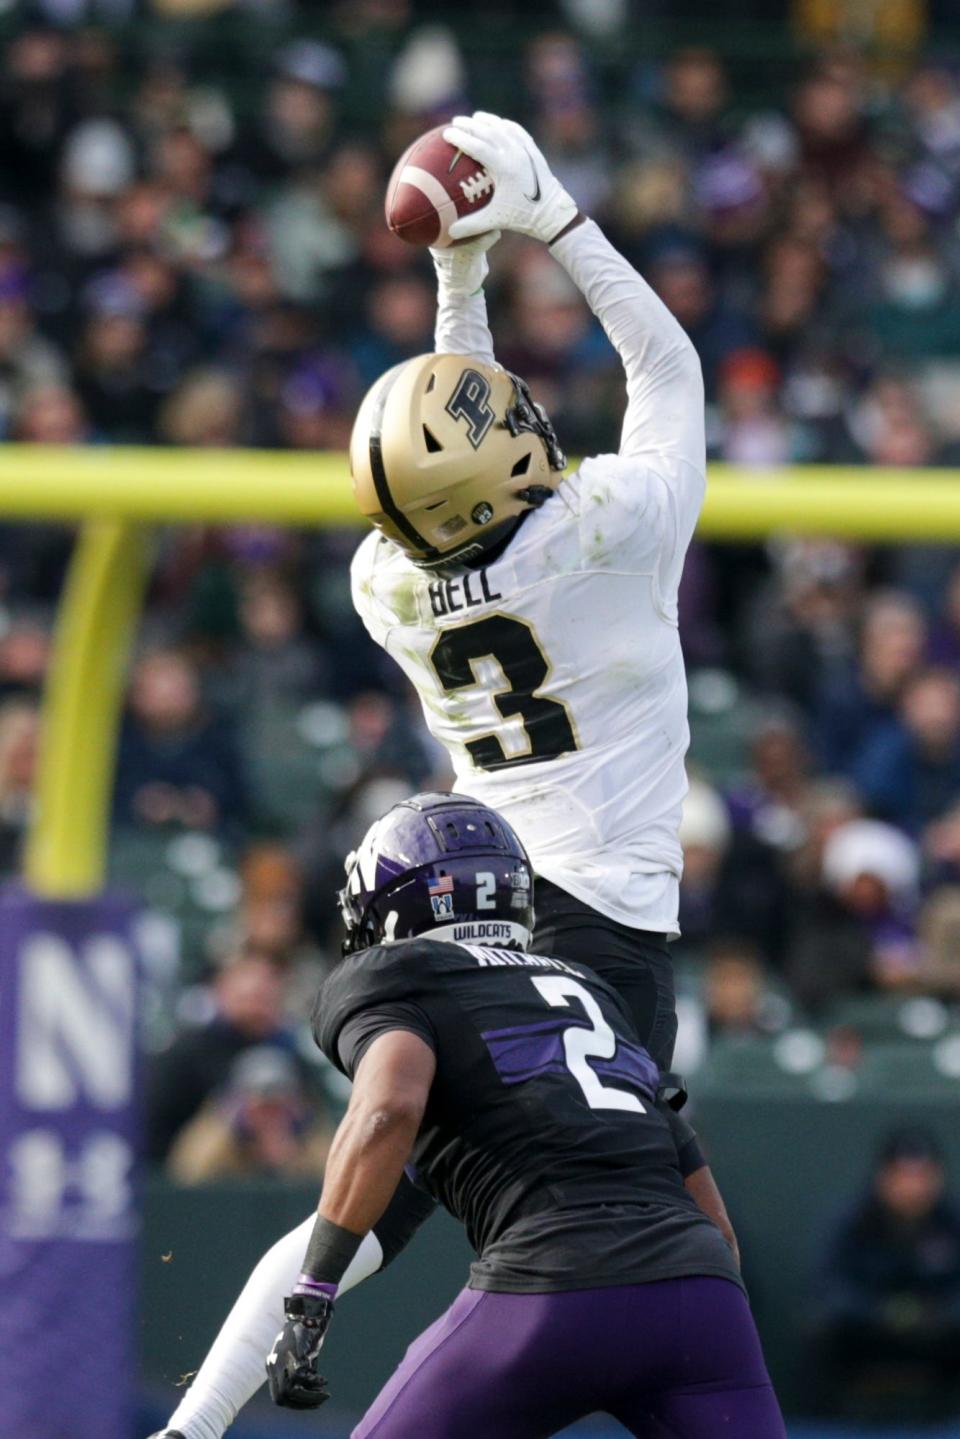 Purdue wide receiver David Bell (3) makes a catch above Northwestern defensive back Cameron Mitchell (2) during the third quarter of an NCAA college football game, Saturday, Nov. 20, 2021 at Wrigley Field in Chicago.